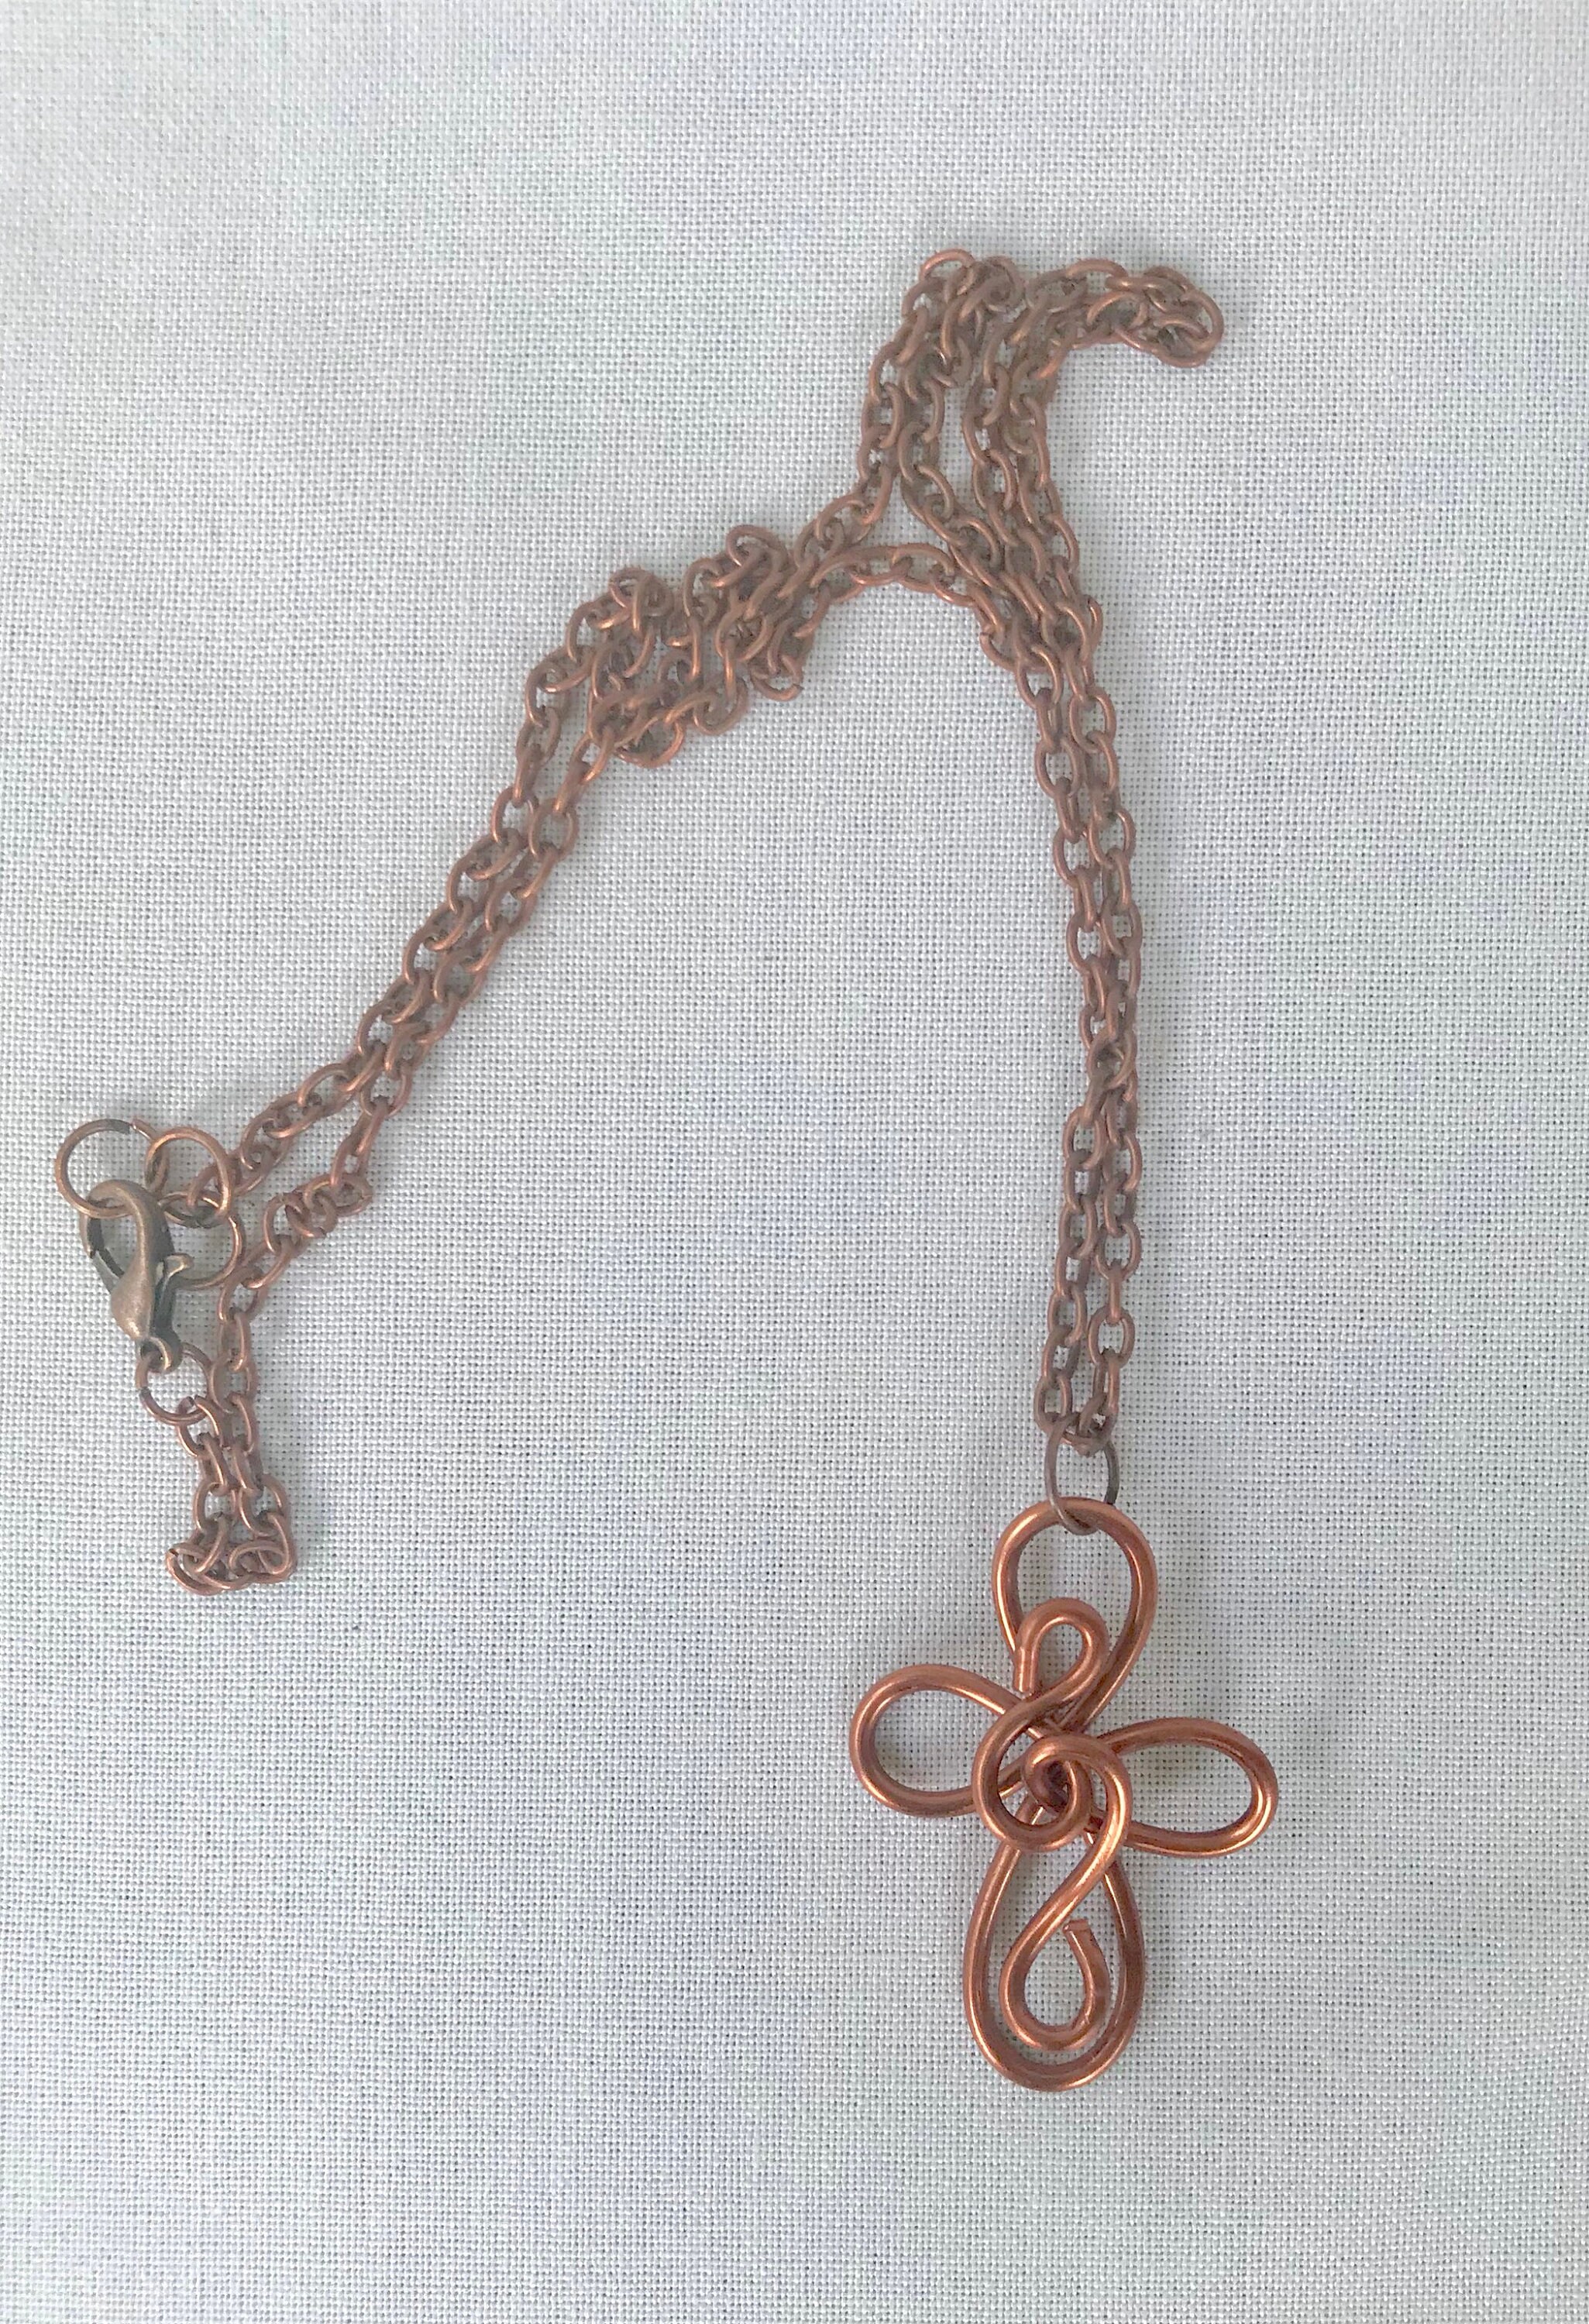 Cross Necklace/Copper Cross Necklace/Small Cross/ Copper | Etsy